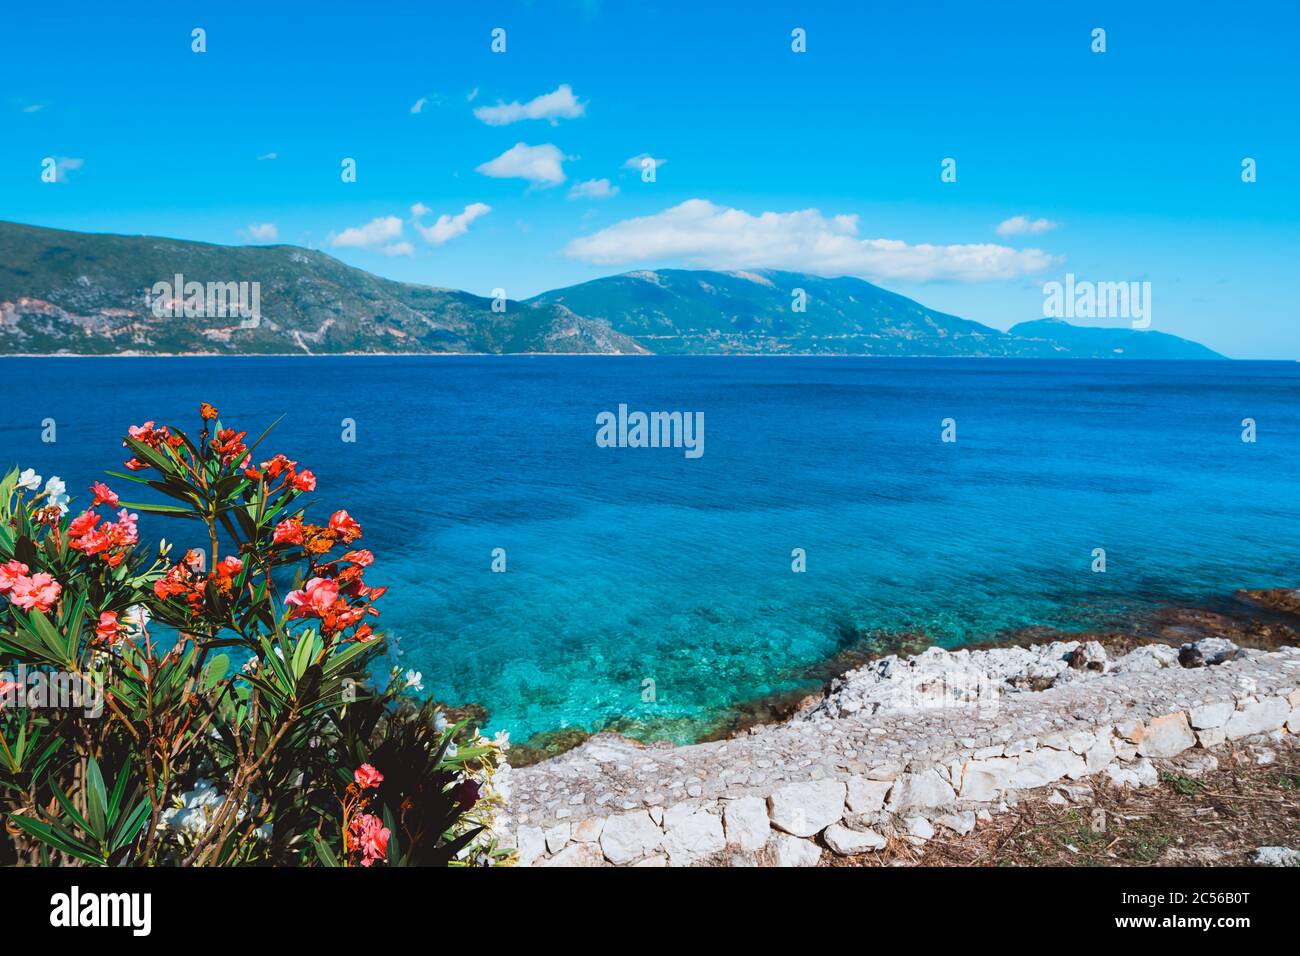 Panorama of crystal clear transparent blue turquoise teal Mediterranean seascape in Fiskardo town. Kefalonia, Ionian islands, Greece. Stock Photo